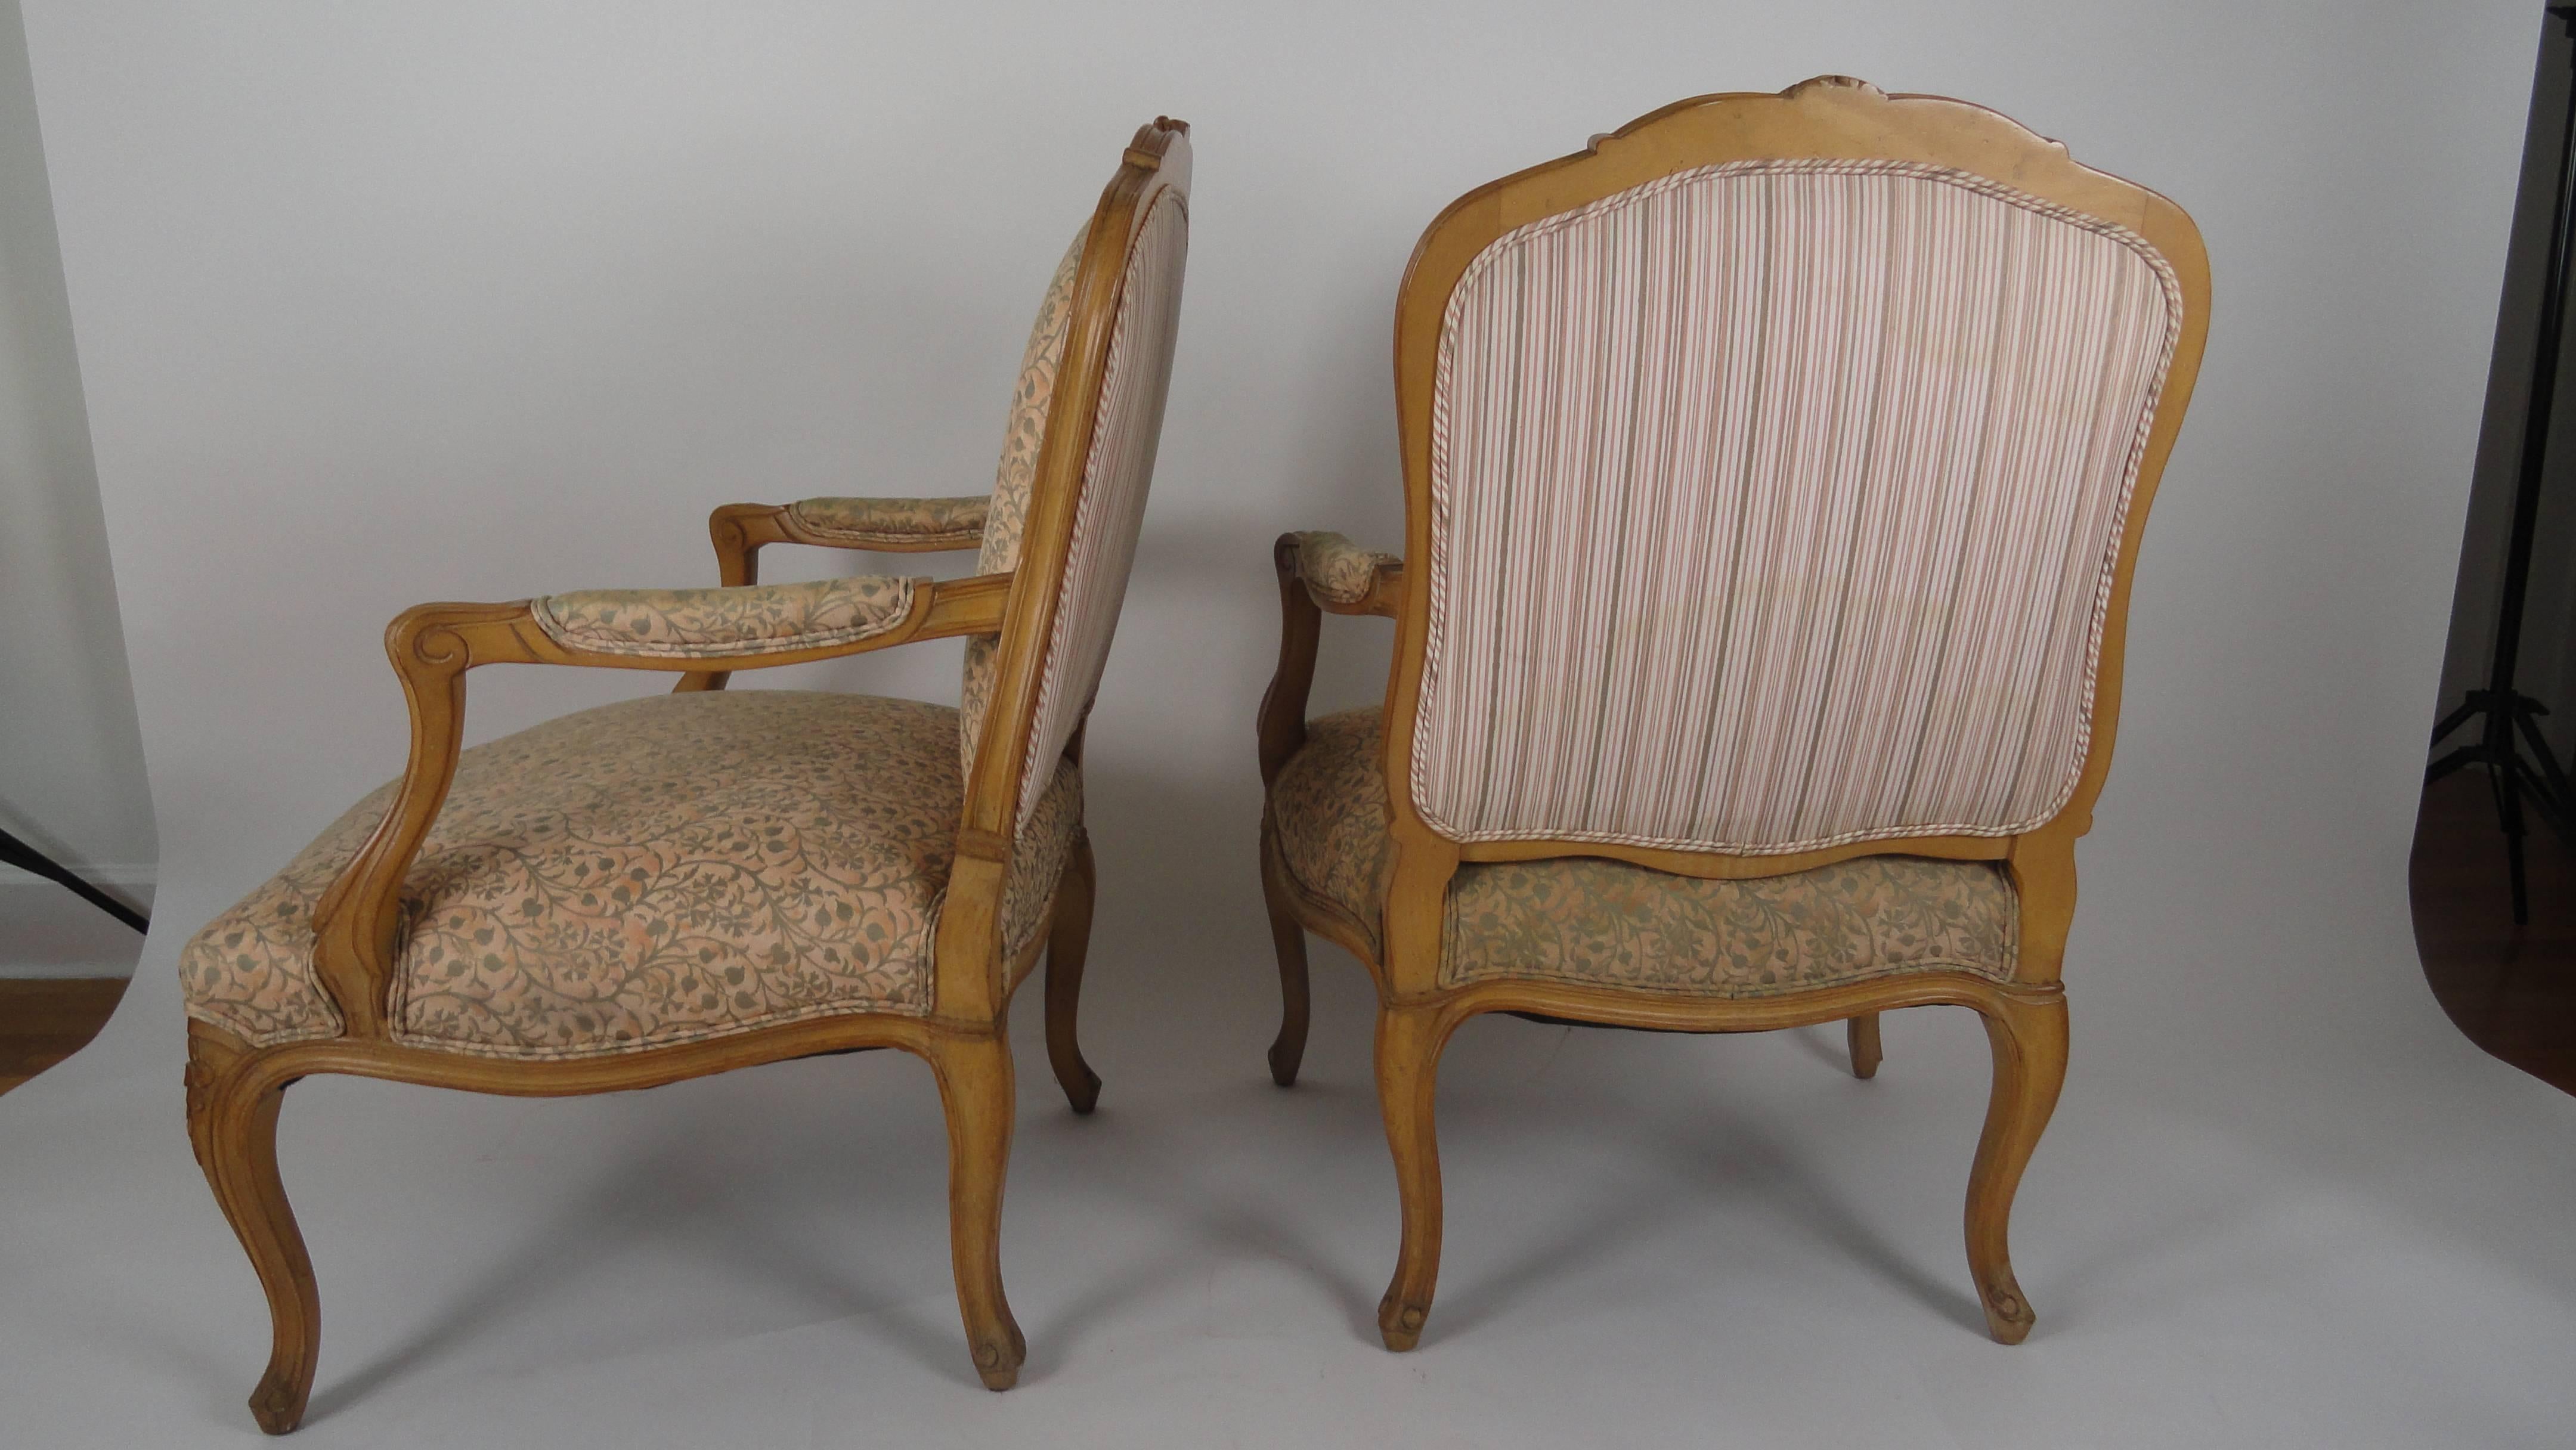 Pair of French open armchairs in the French Louis XV style. Cartouche shaped padded backs, padded down scrolled arms. Serpentine upholstered seats with a curved detail on cabriole legs. Beautiful hard carving. Covered in Fortuny.